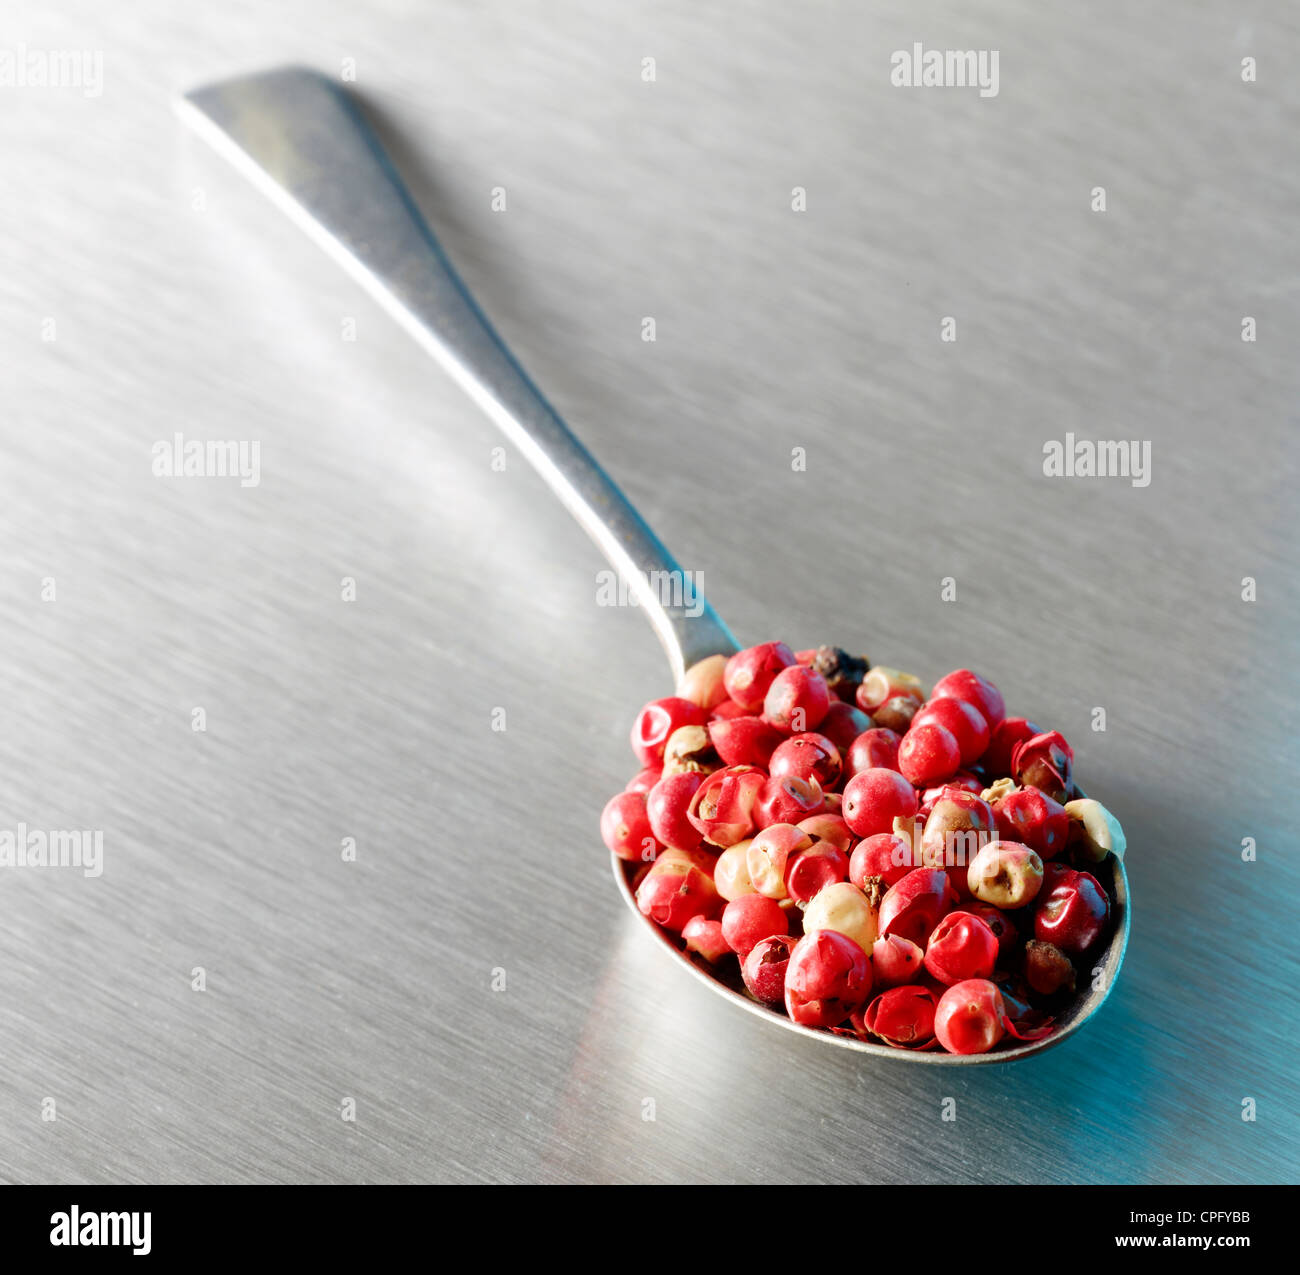 Pink peppercorns in a metal spoon on stainless steel surface Stock Photo